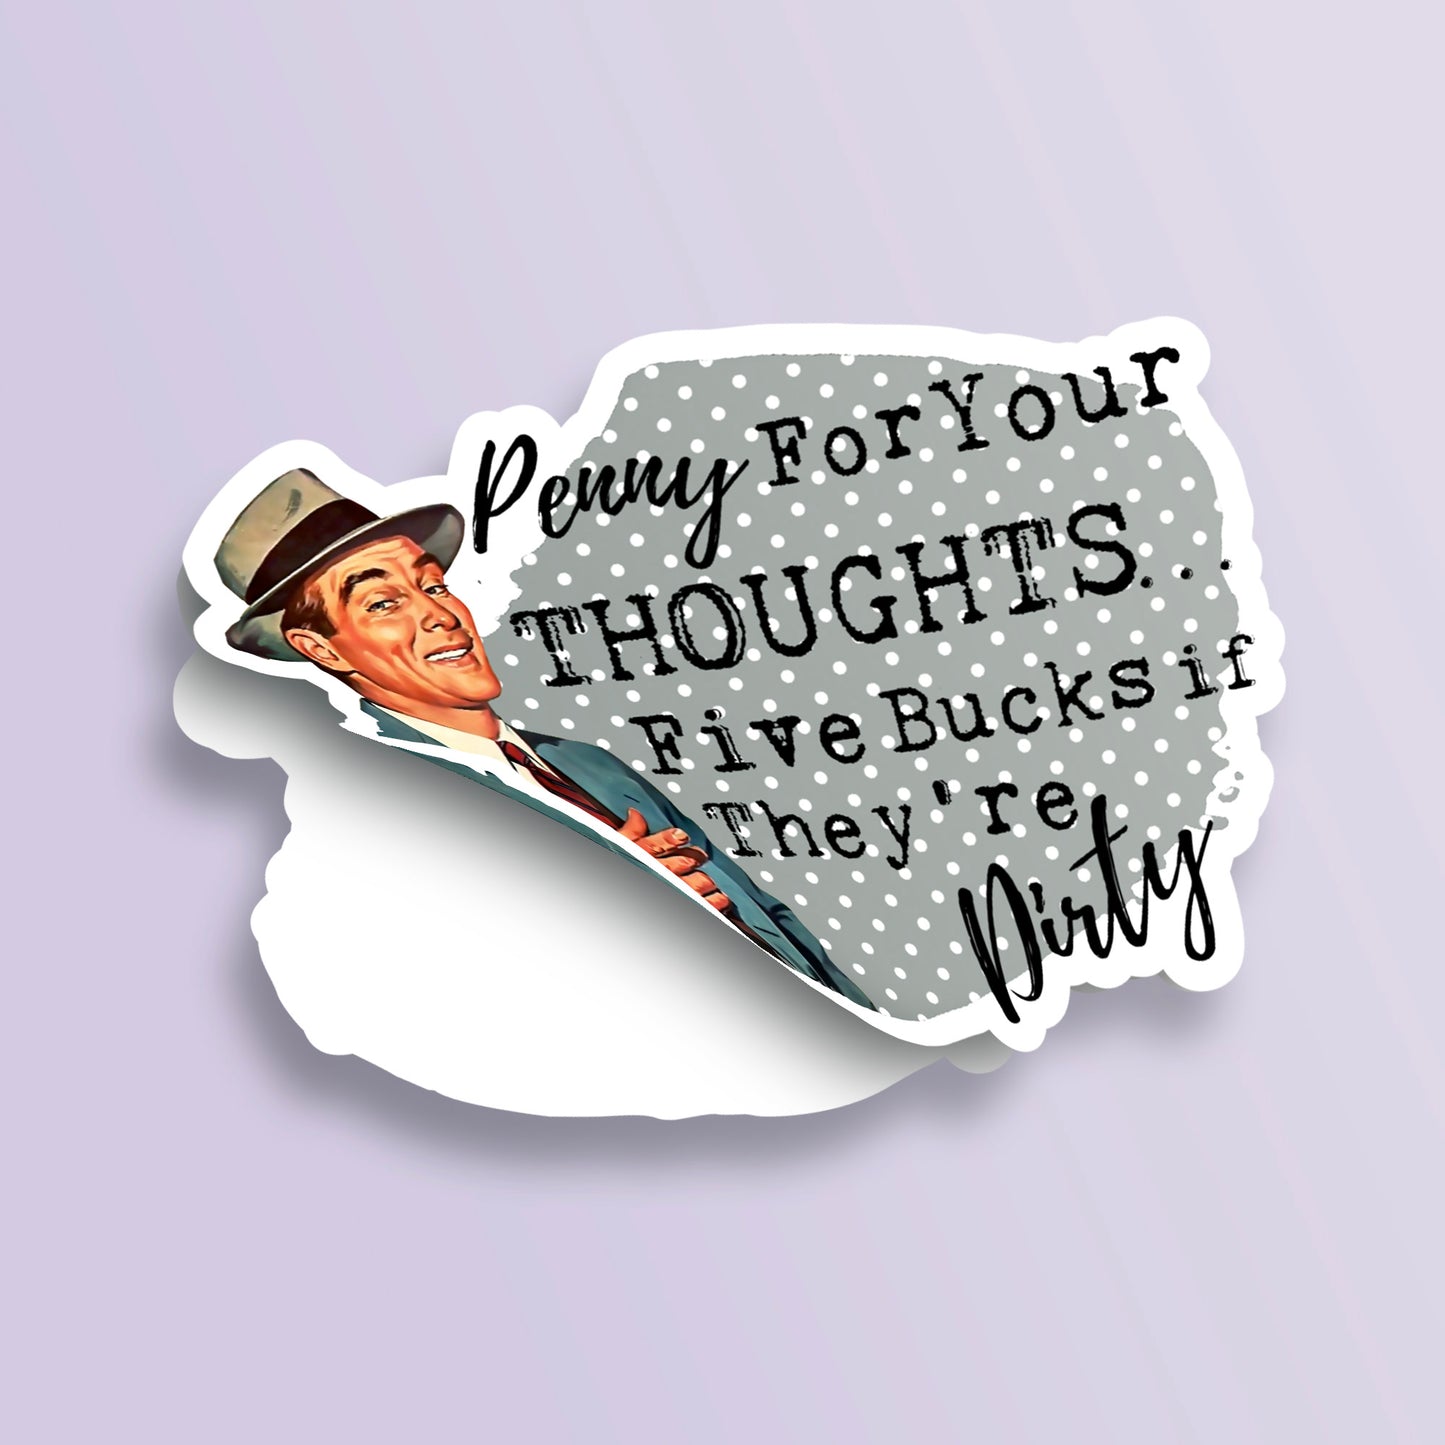 Penny For Your Thoughts…Five Bucks If They Are Dirty